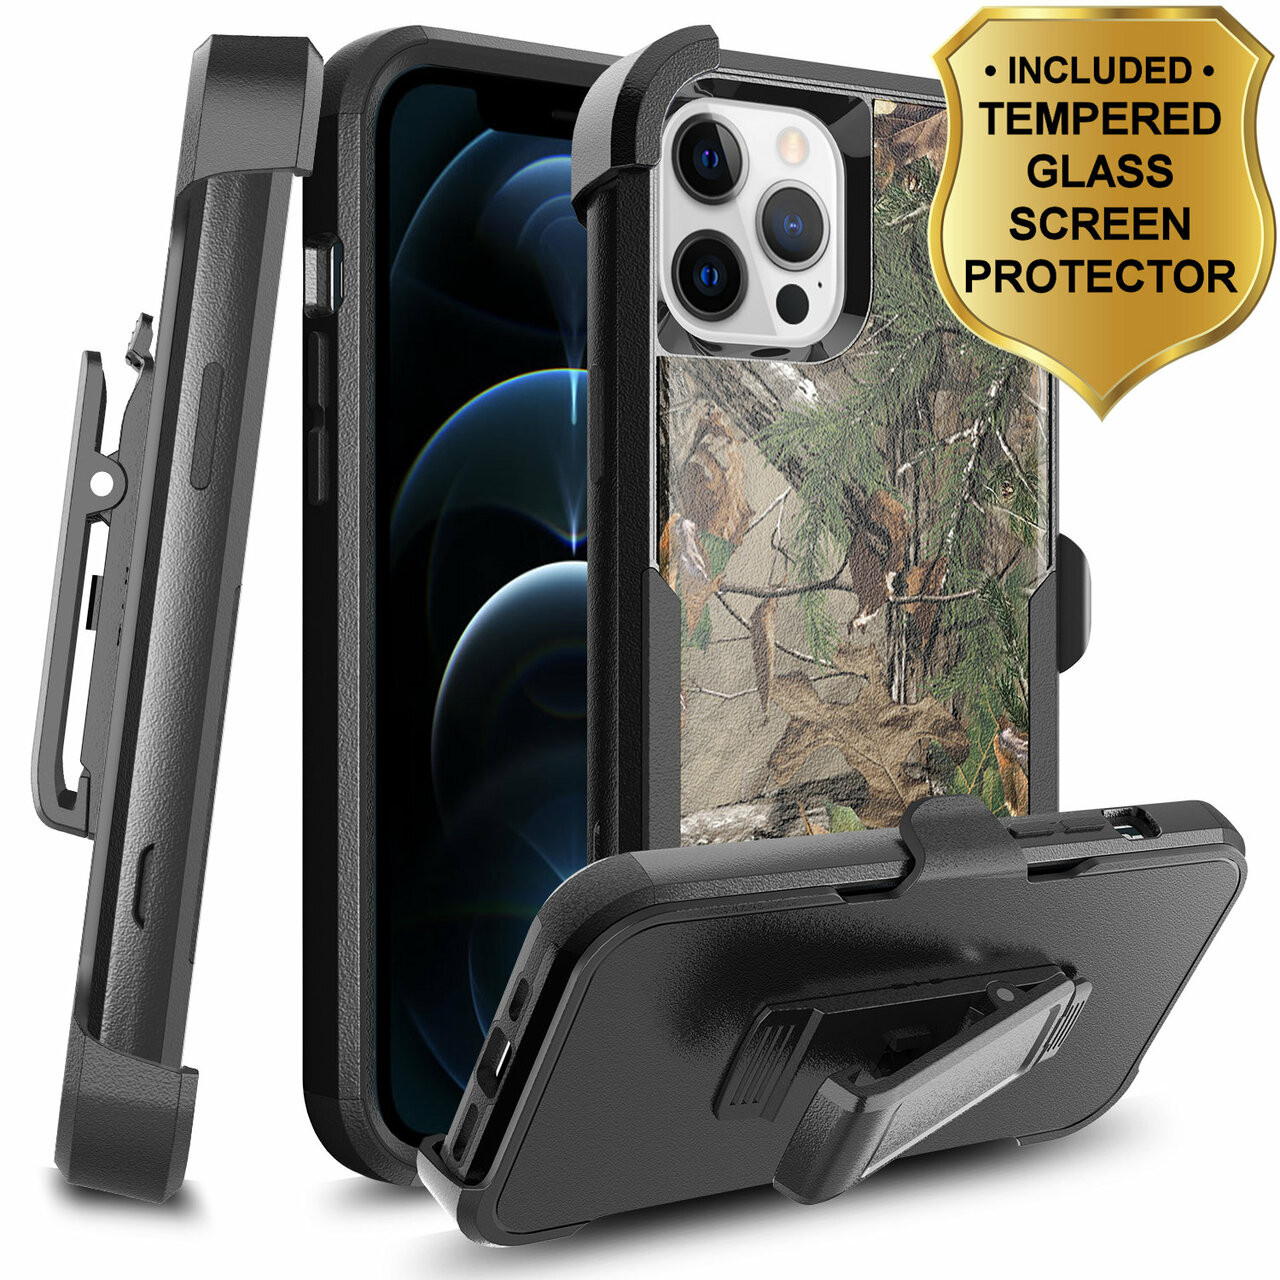 iPhone 8 Camo Case HarseL Heavy Duty Camouflage Tree Impact Resistant Tough Hybrid Rugged Armor Military Defender Case with Swivel Belt Clip Built-in Screen Protector for iPhone 7/8 